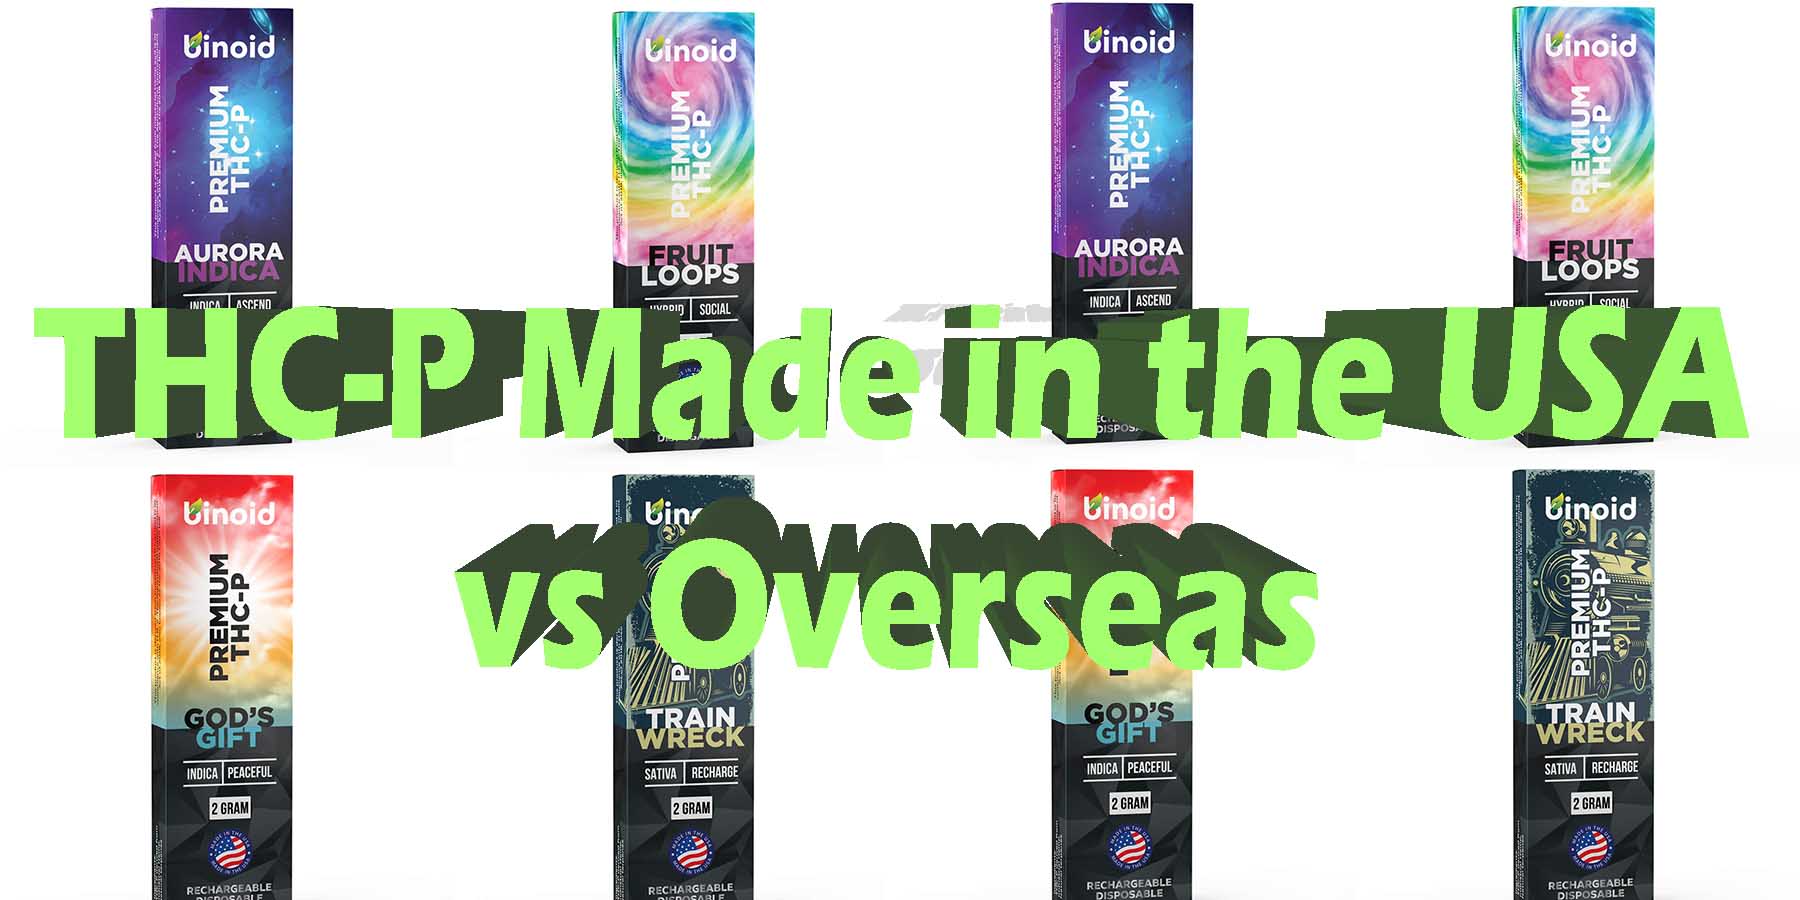 THC-P Made in the USA vs overseas WhereToGet HowToGetNearMe BestPlace LowestPrice Coupon Discount For Smoking Best High Smoke Shop Online Near Me Binoid